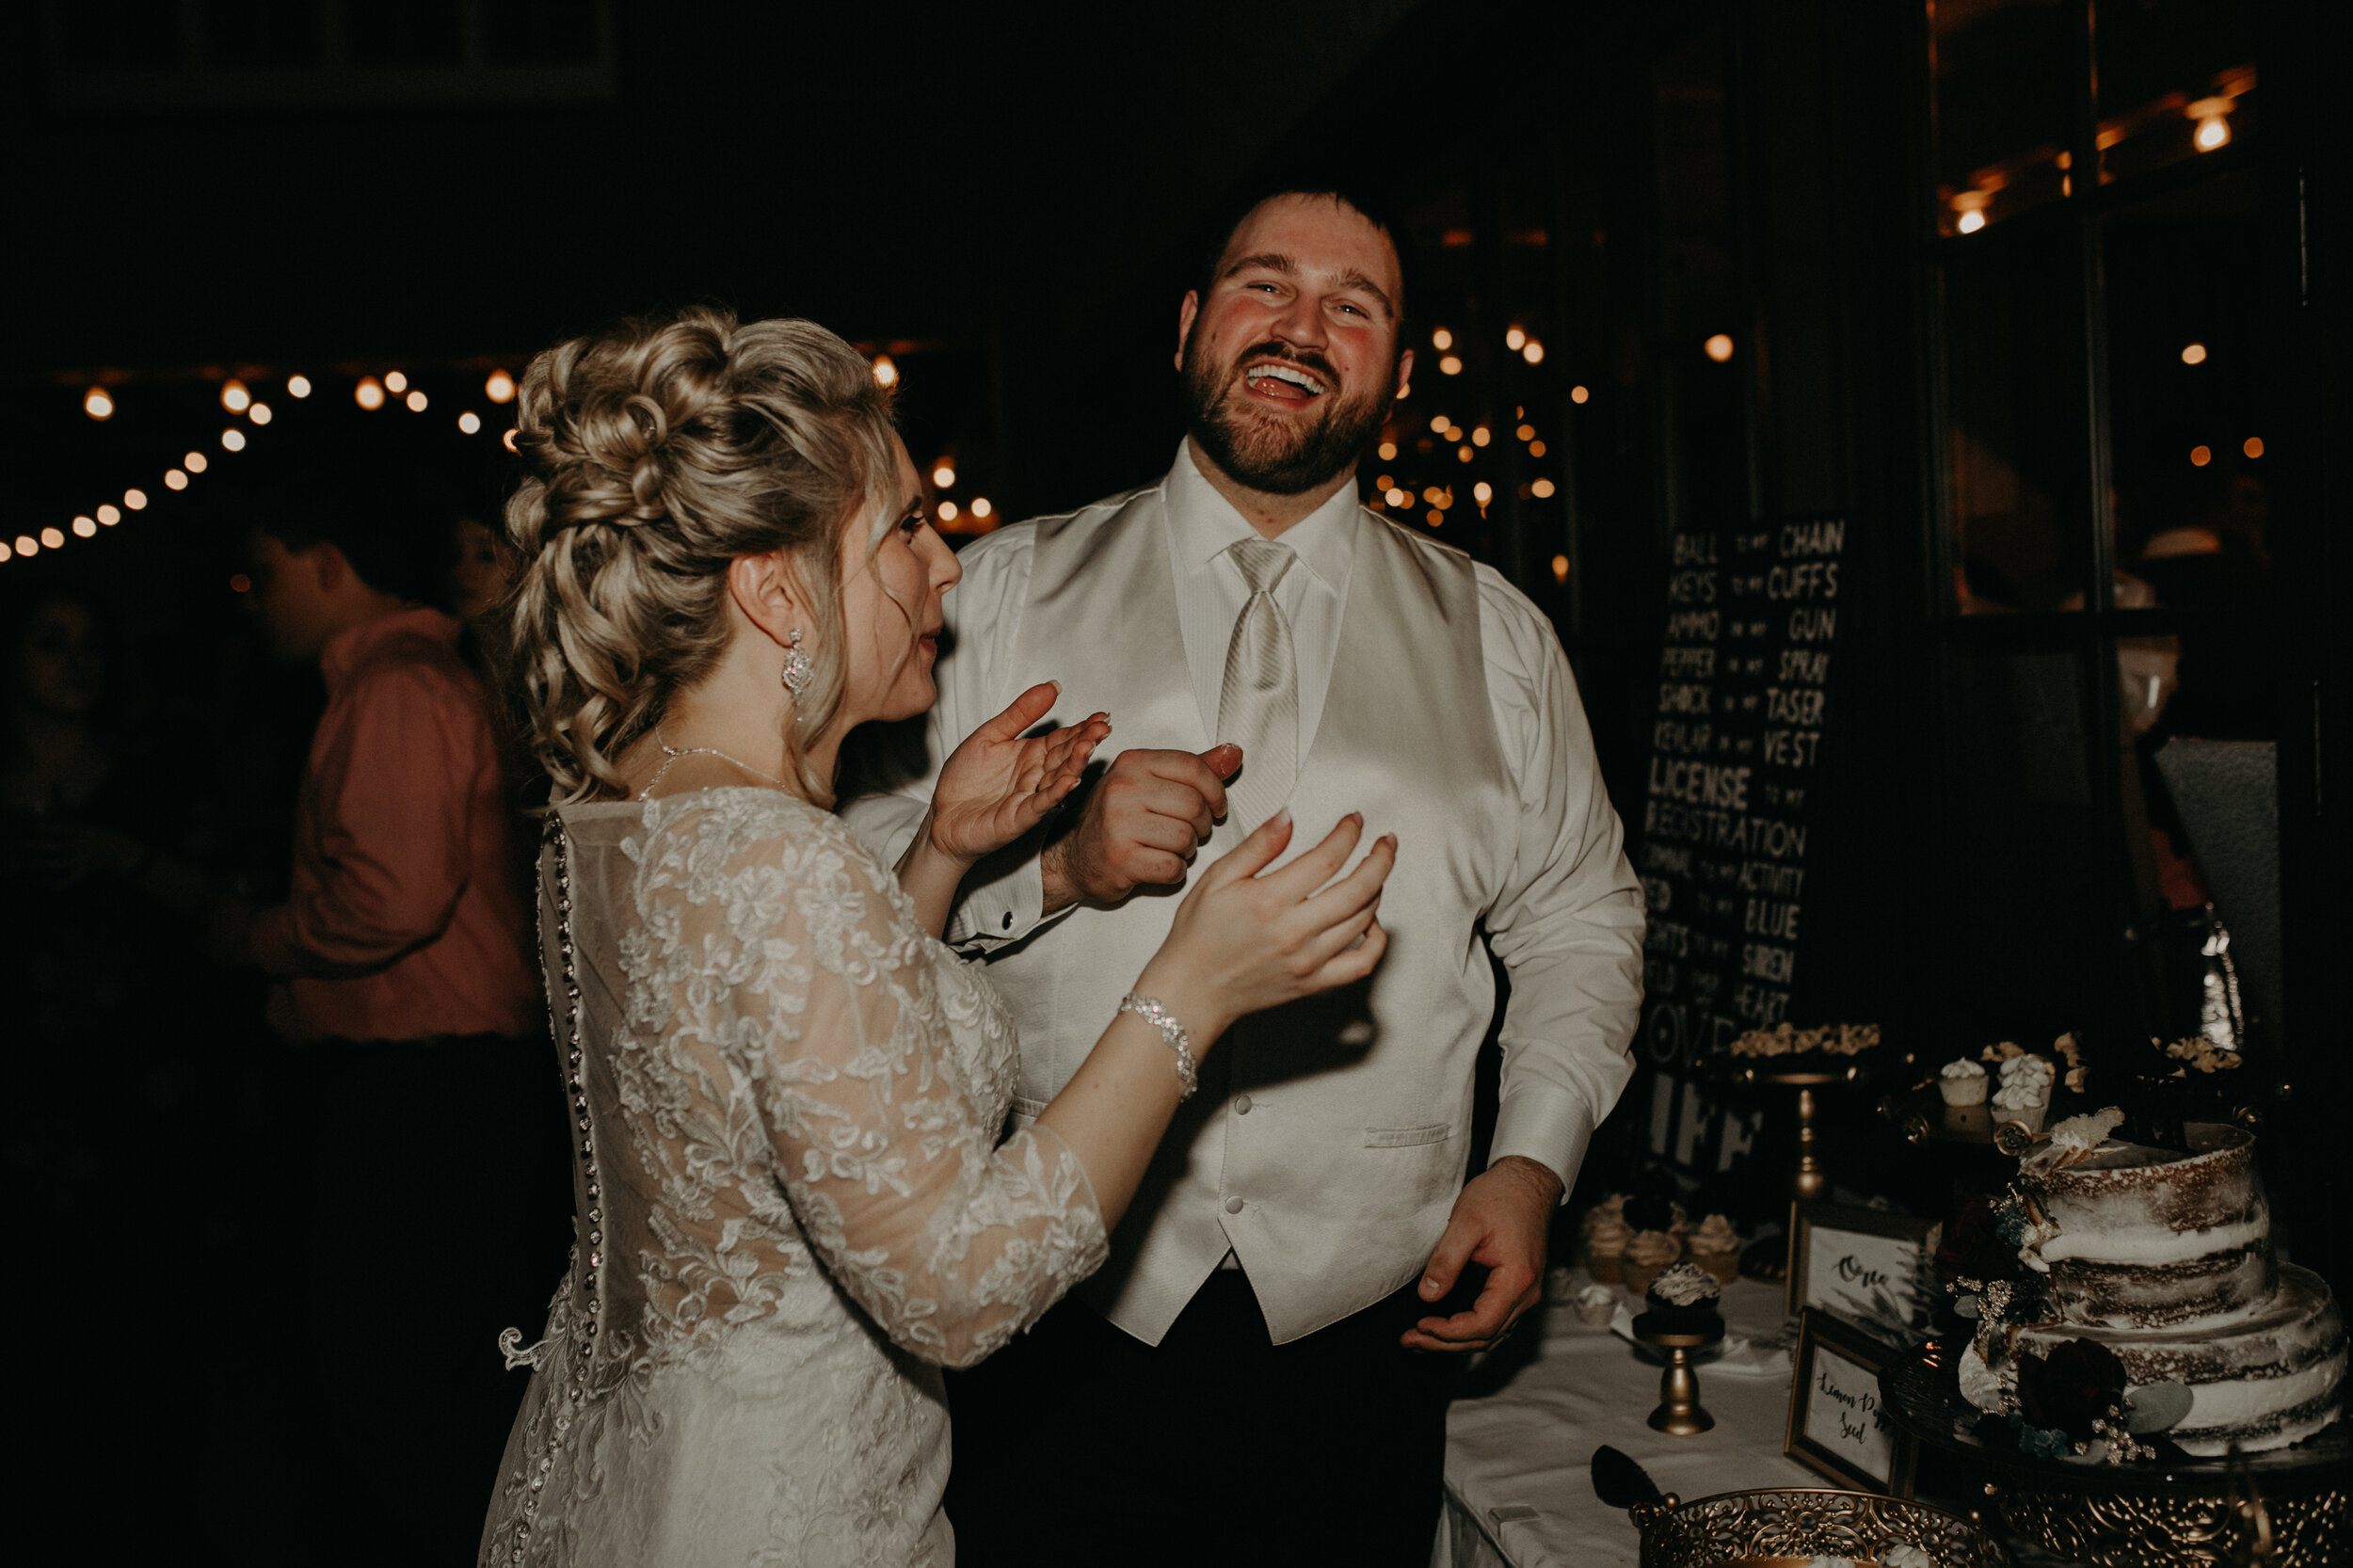  Andrea Wanger Photography cozy winter Wisconsin wedding. Perfect Wisconsin wedding in February. Elegant winter wedding. Reception dessert table. Bride and groom cutting cake. 